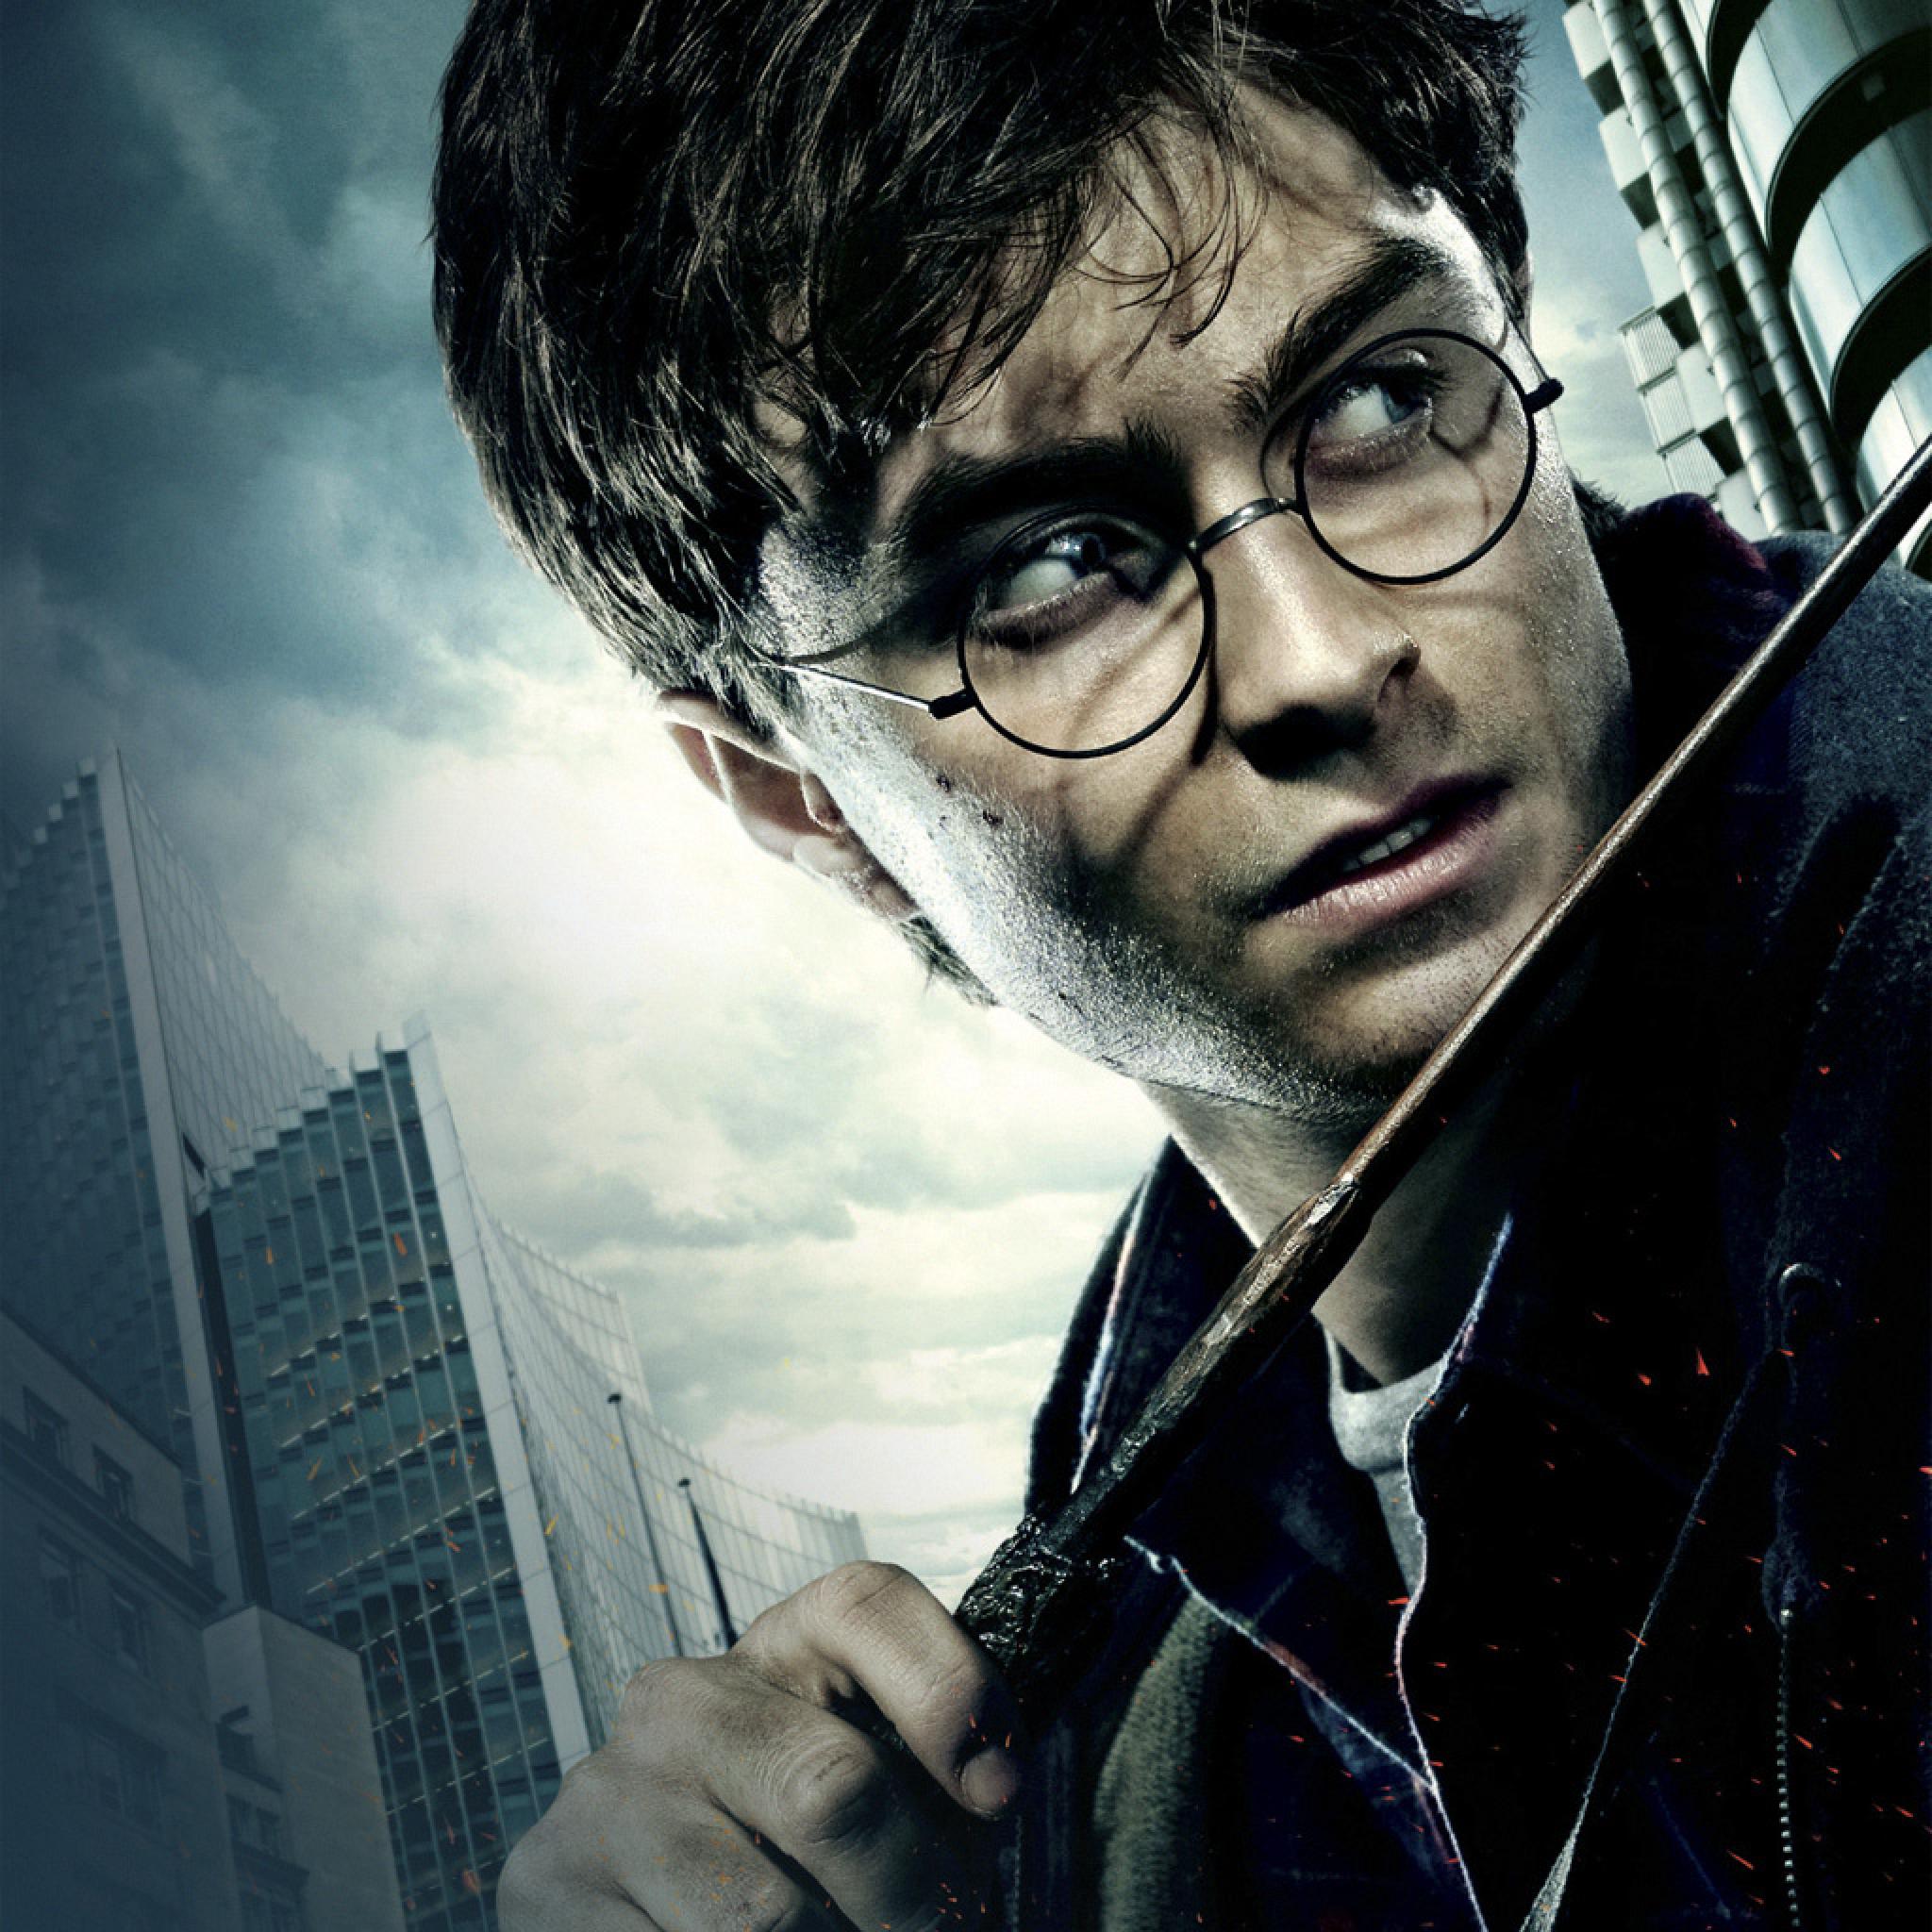 Harry Potter Deathly Hallows Part 1 Poster - HD Wallpaper 